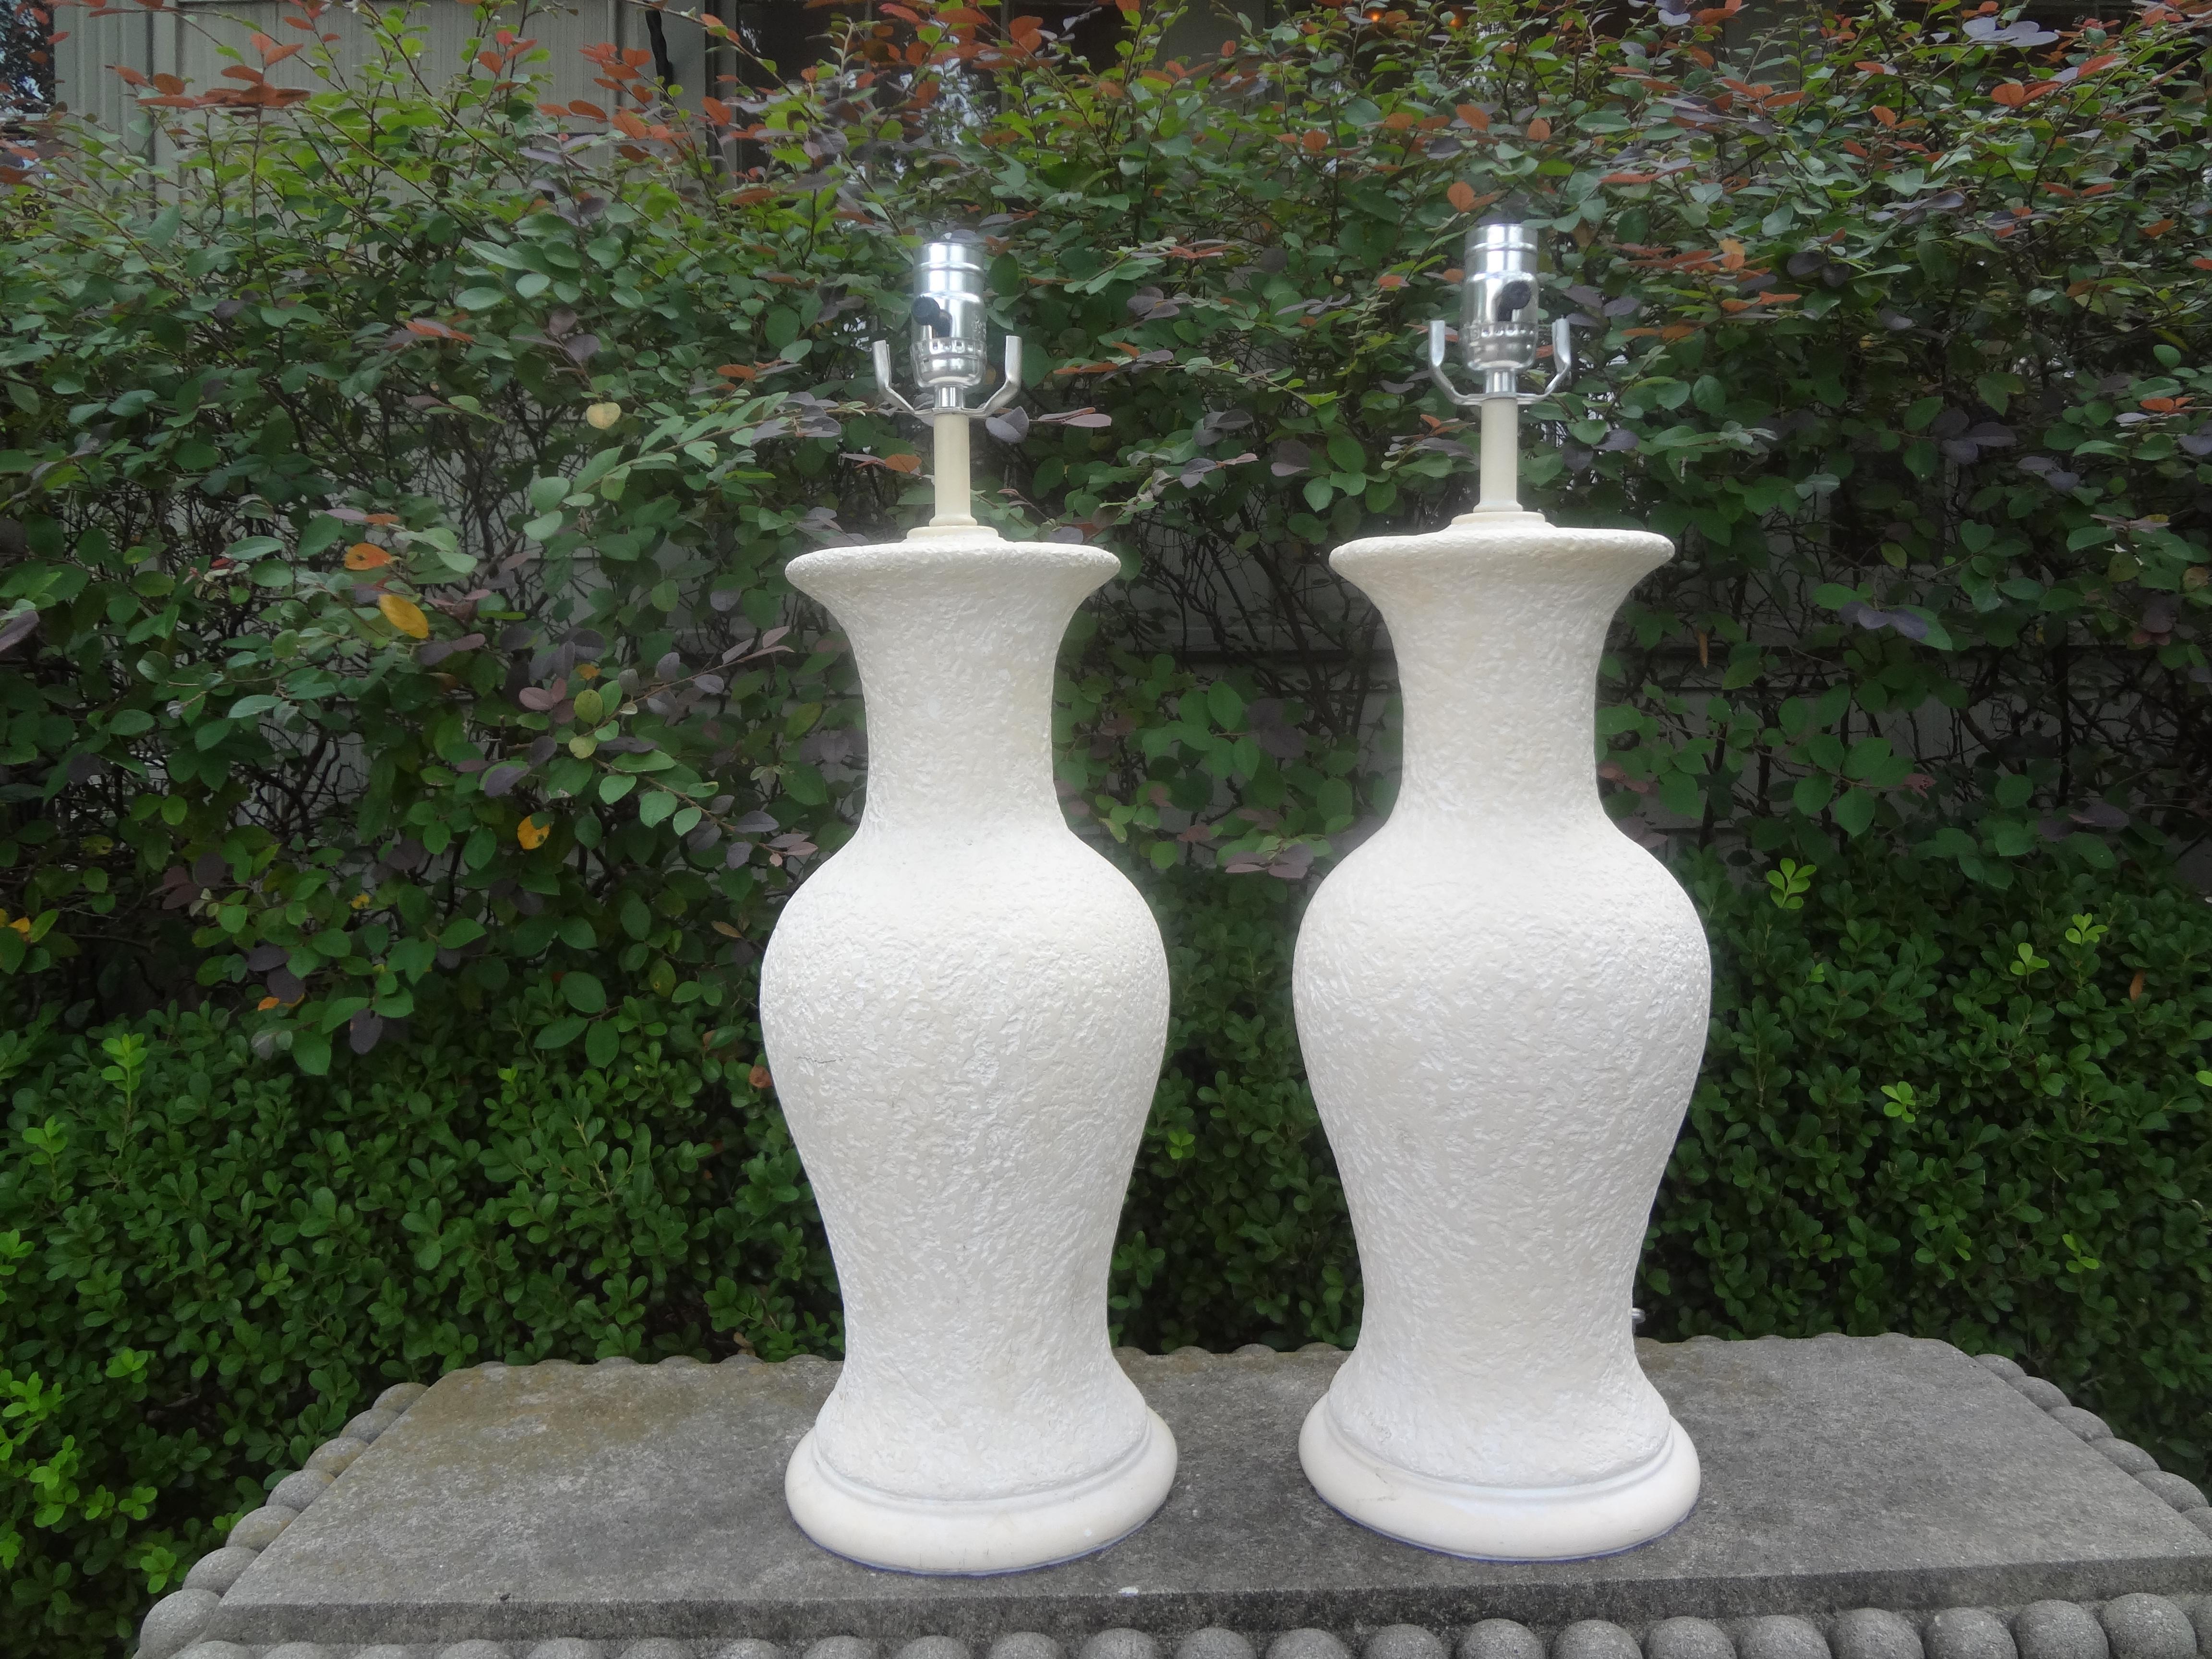 Pair Of Hollywood Regency Plaster Lamps.
This stylish pair of Hollywood Regency plaster lamps have a textured finish and are newly wired with new sockets for the U.S. market.